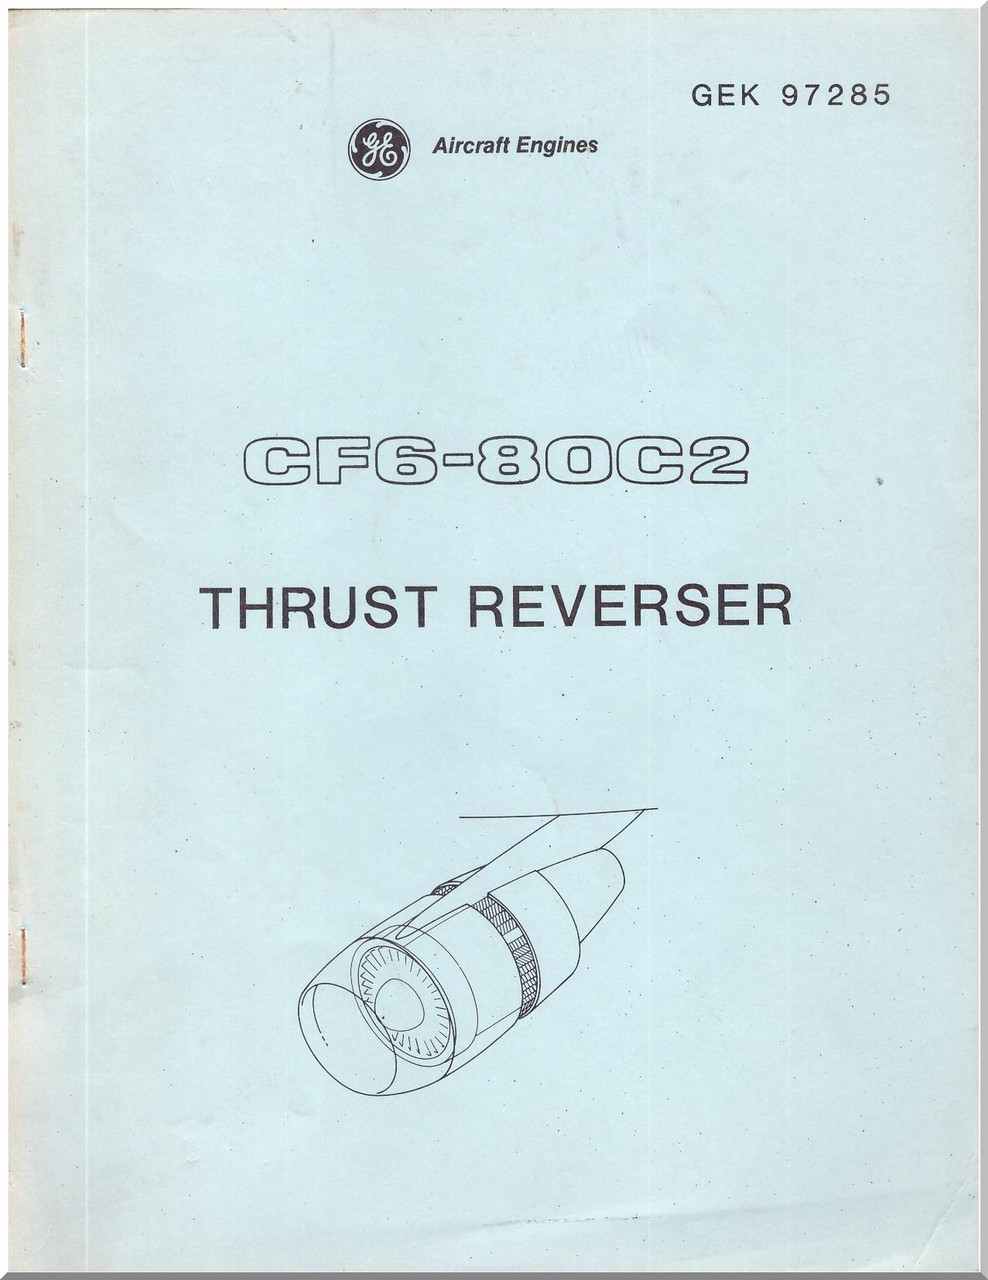 GE CF6-80C2 Aircraft Jet Engine Fan Reverse Technical Manual - GEK- 97285 -  Aircraft Reports - Aircraft Manuals - Aircraft Helicopter Engines  Propellers Blueprints Publications